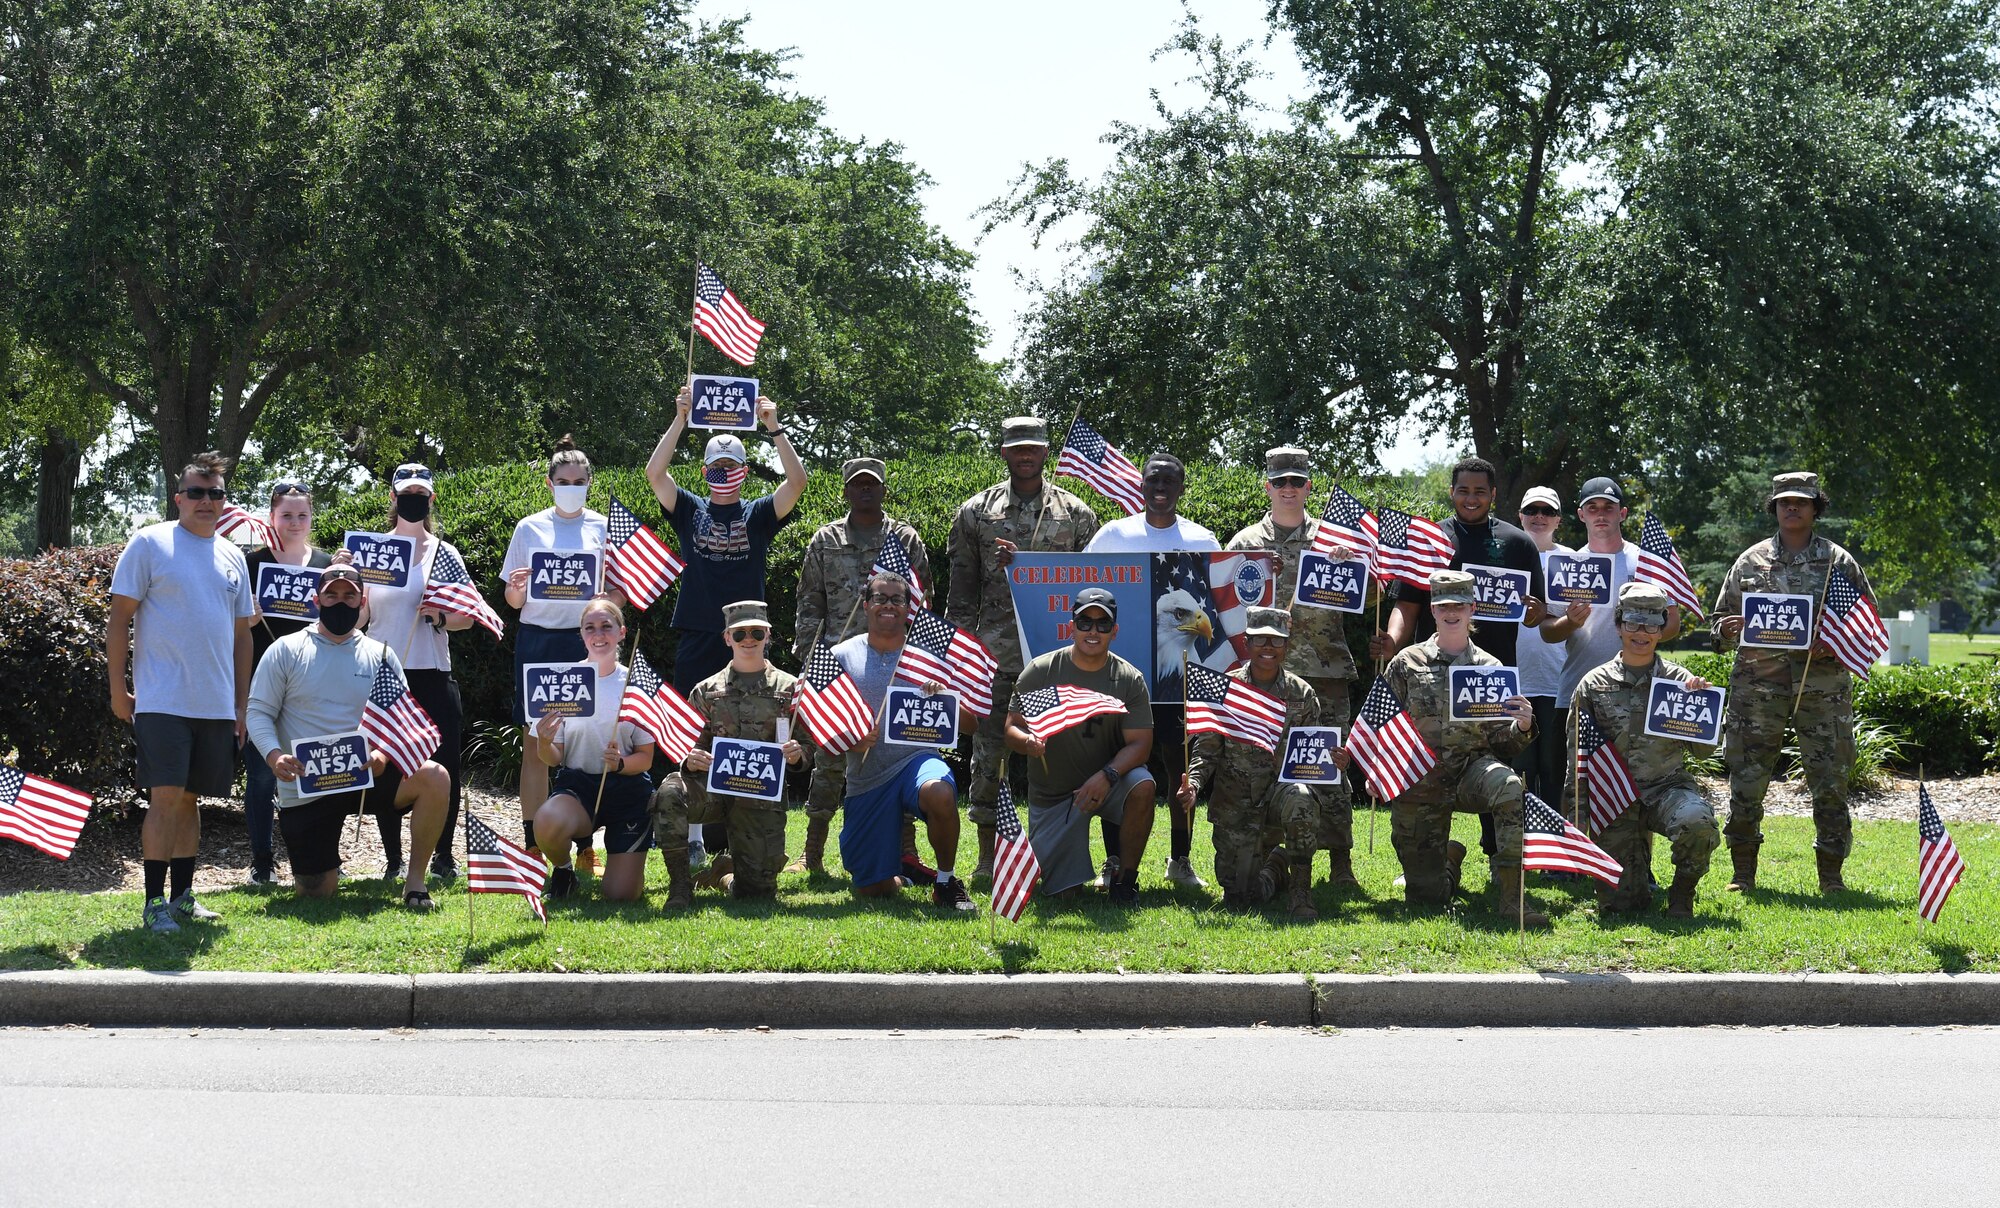 Members of the Air Force Sergeants Association Chapter 652 pose for a photo prior to placing U.S. flags in the ground along Larcher Blvd. at Keesler Air Force Base, Mississippi, June 11, 2021. June 14 is Flag Day, a celebration of the history of the American flag and a time to remember proper etiquette for its display. Flag Day recognizes the adoption of the Stars and Stripes as the official flag of the United States 238 years ago on June 14, 1777, by the Continental Congress meeting in Philadelphia. (U.S. Air Force photo by Kemberly Groue)